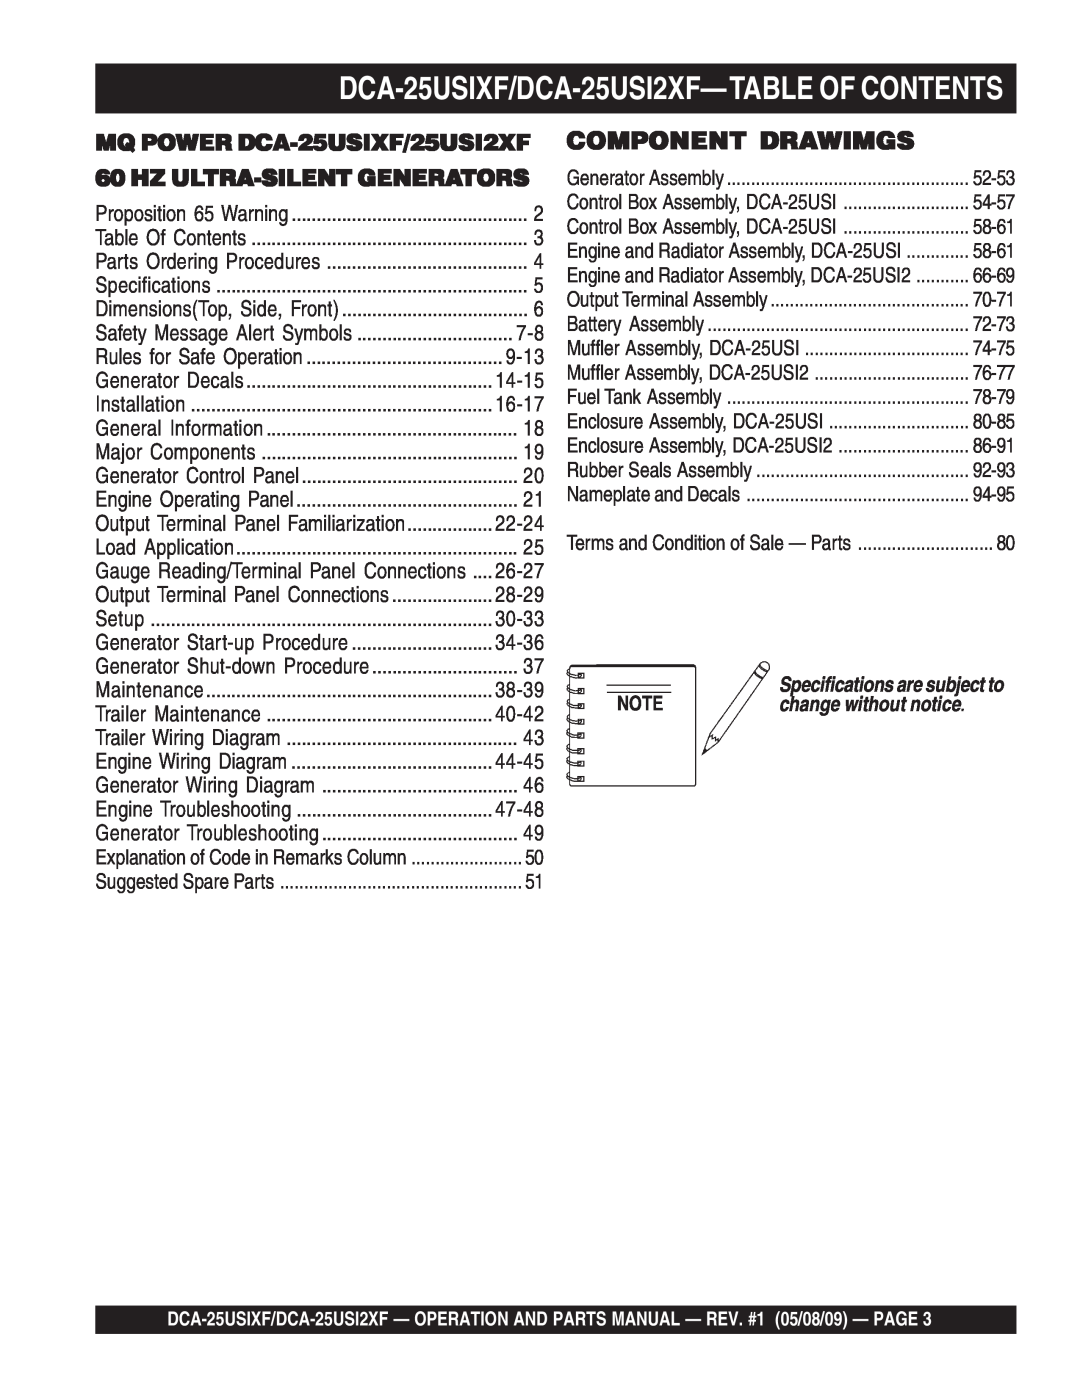 Multiquip operation manual DCA-25USIXF/DCA-25USI2XF-TABLE OF CONTENTS, Component Drawimgs, 9-13, change without notice 